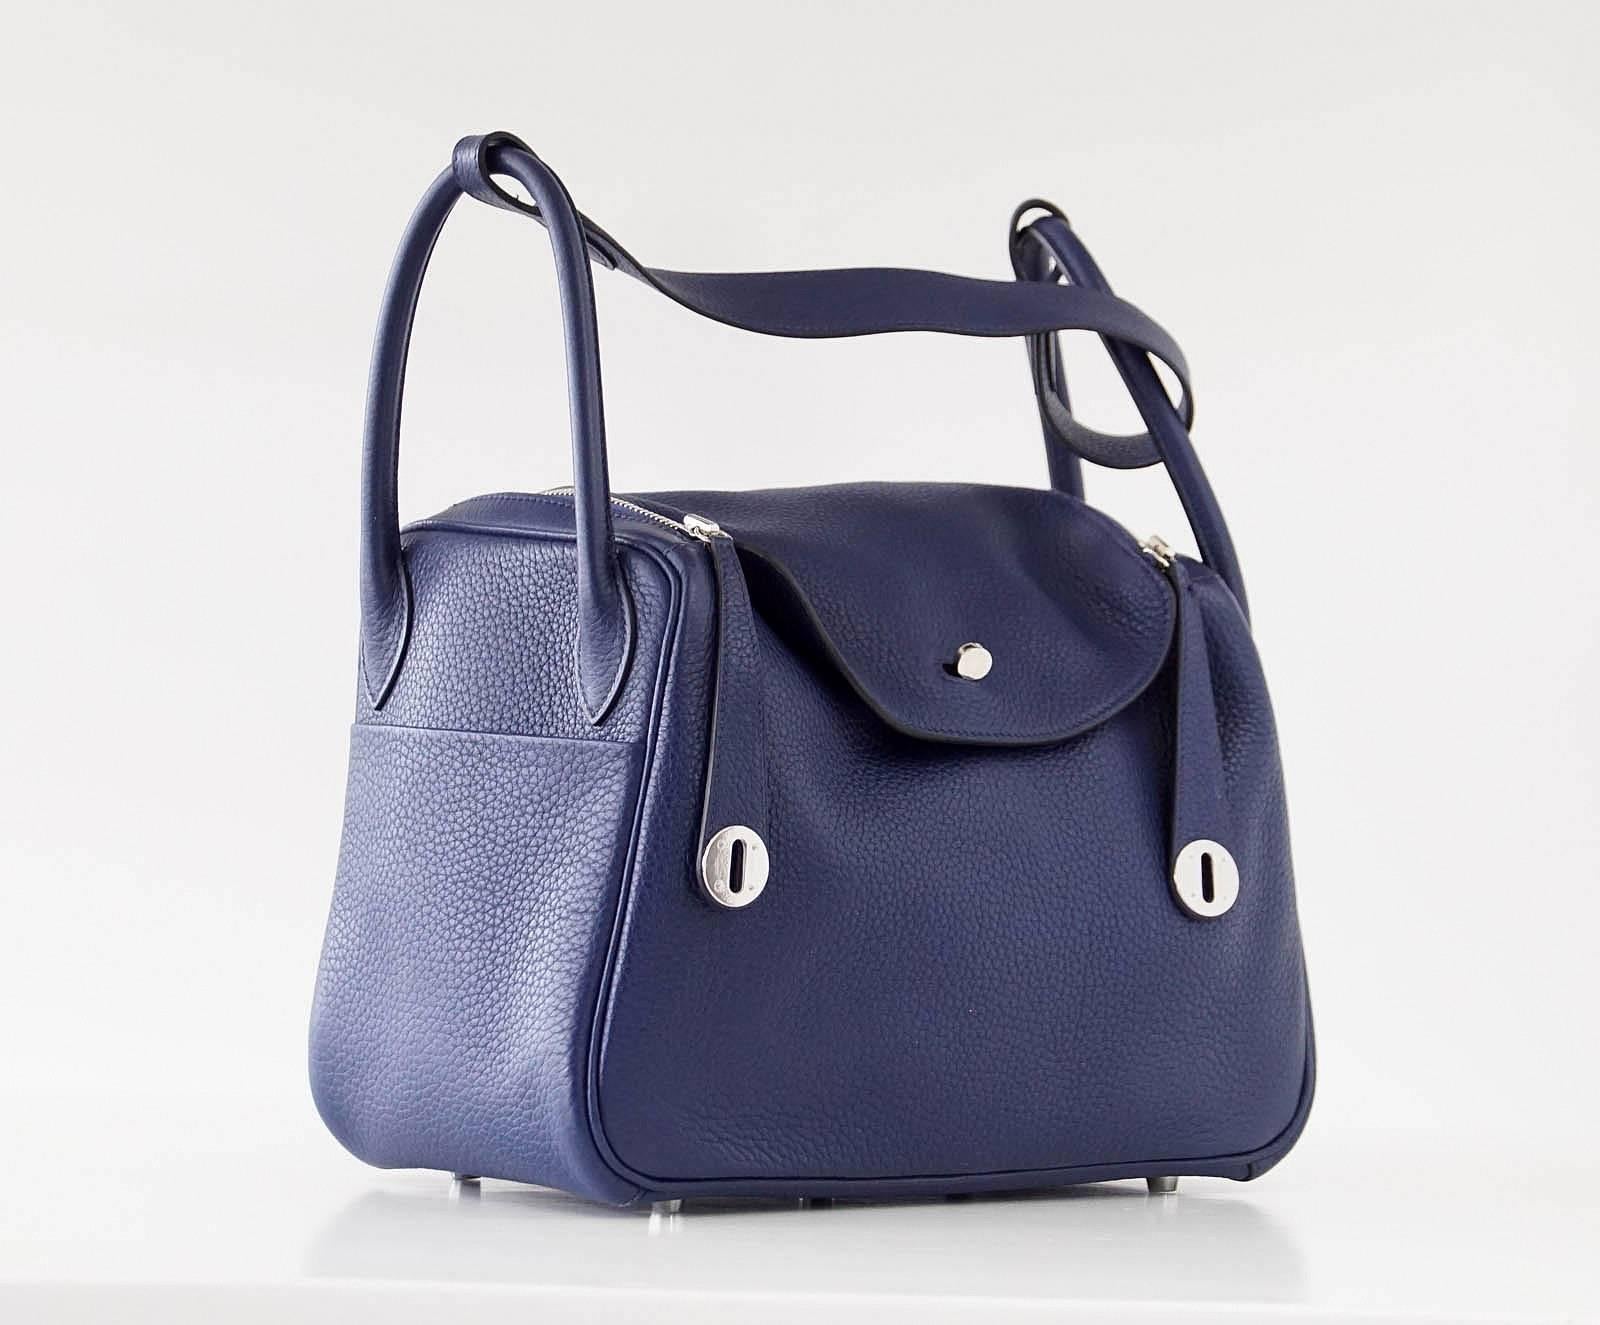 Guaranteed authentic Hermes versatile Lindy in jewel toned Sapphire Blue Clemence leather.
Can be carried by hand or shoulder - and instatnly changes appearance!.
Spacious interior with a slot pocket on each side.
Top has 2 zips and exterior has